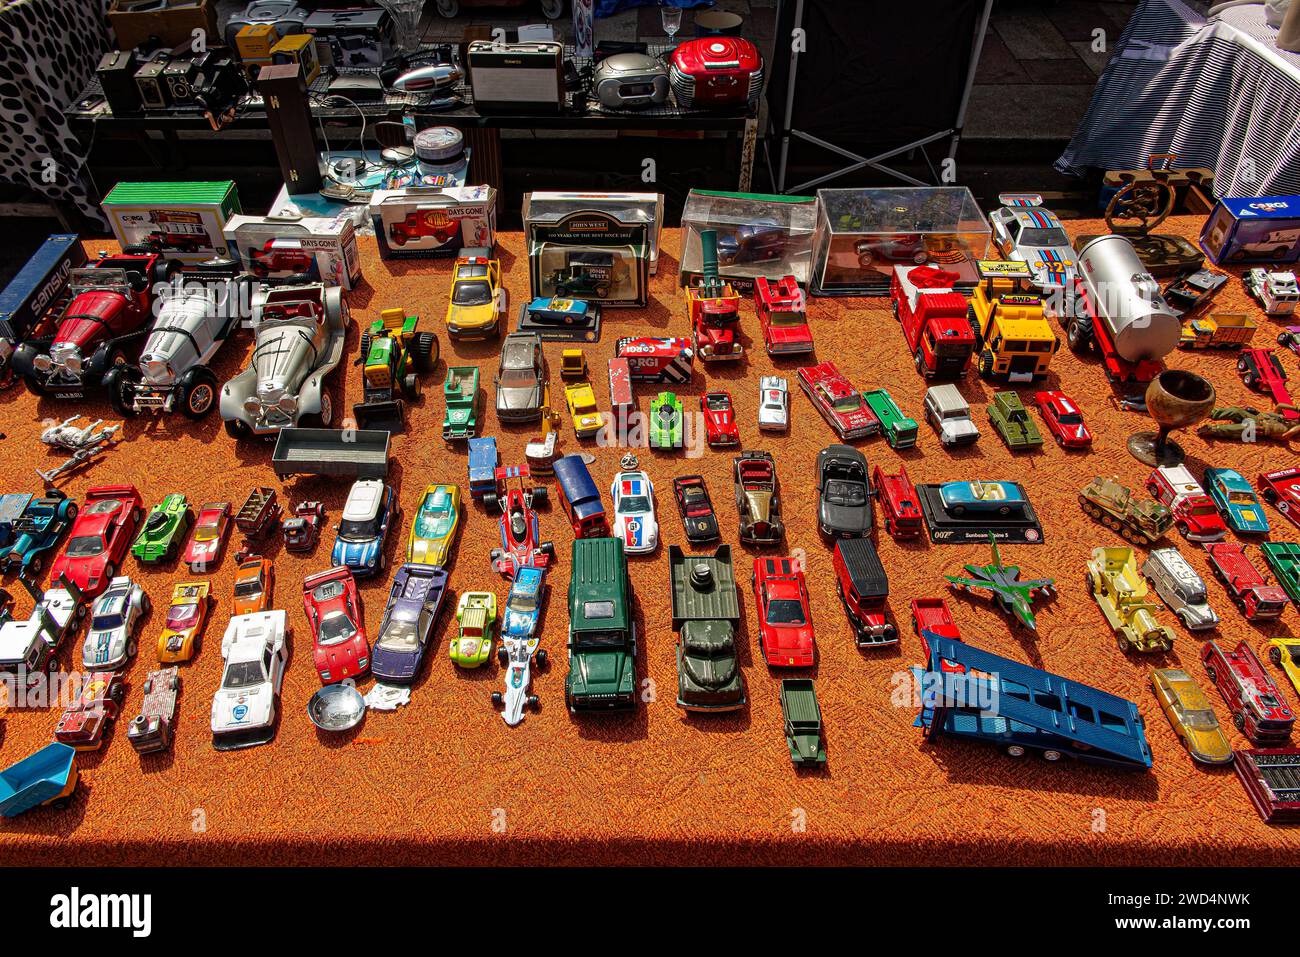 Display of second hand collectable die cast model cars etc. Stock Photo